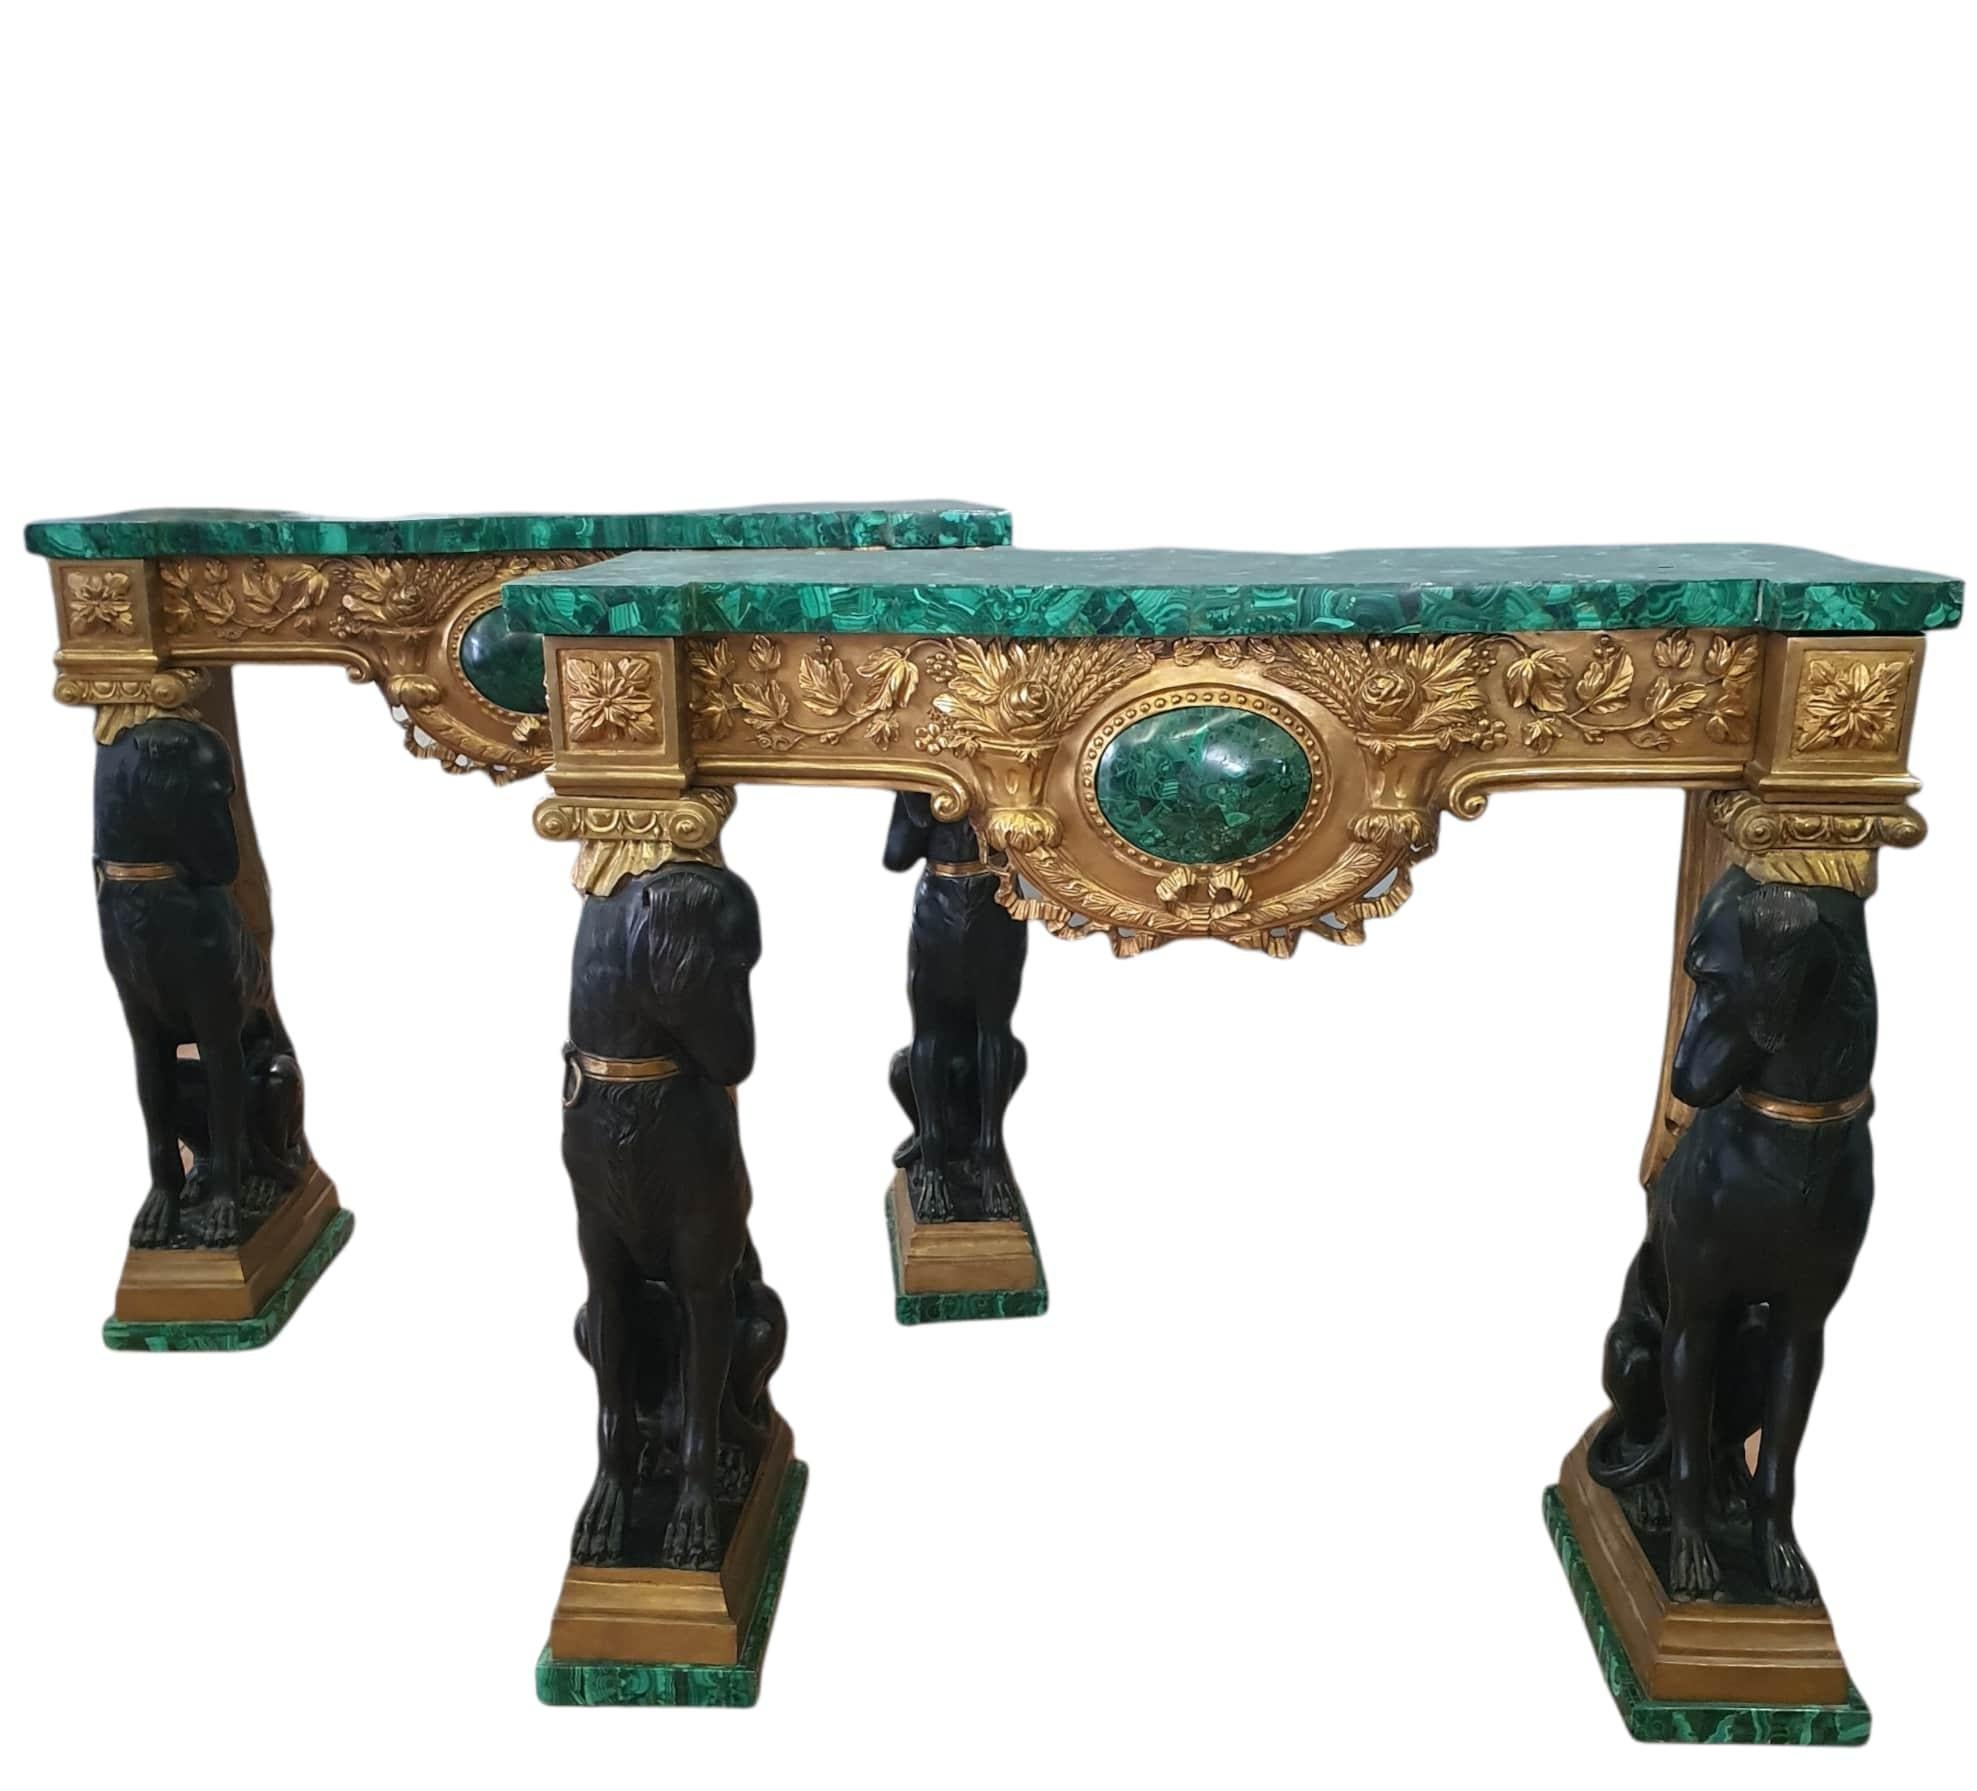 Gilt Pair of Empire Consoles, Patinated and Gilded Bronze, Flowered Malachite